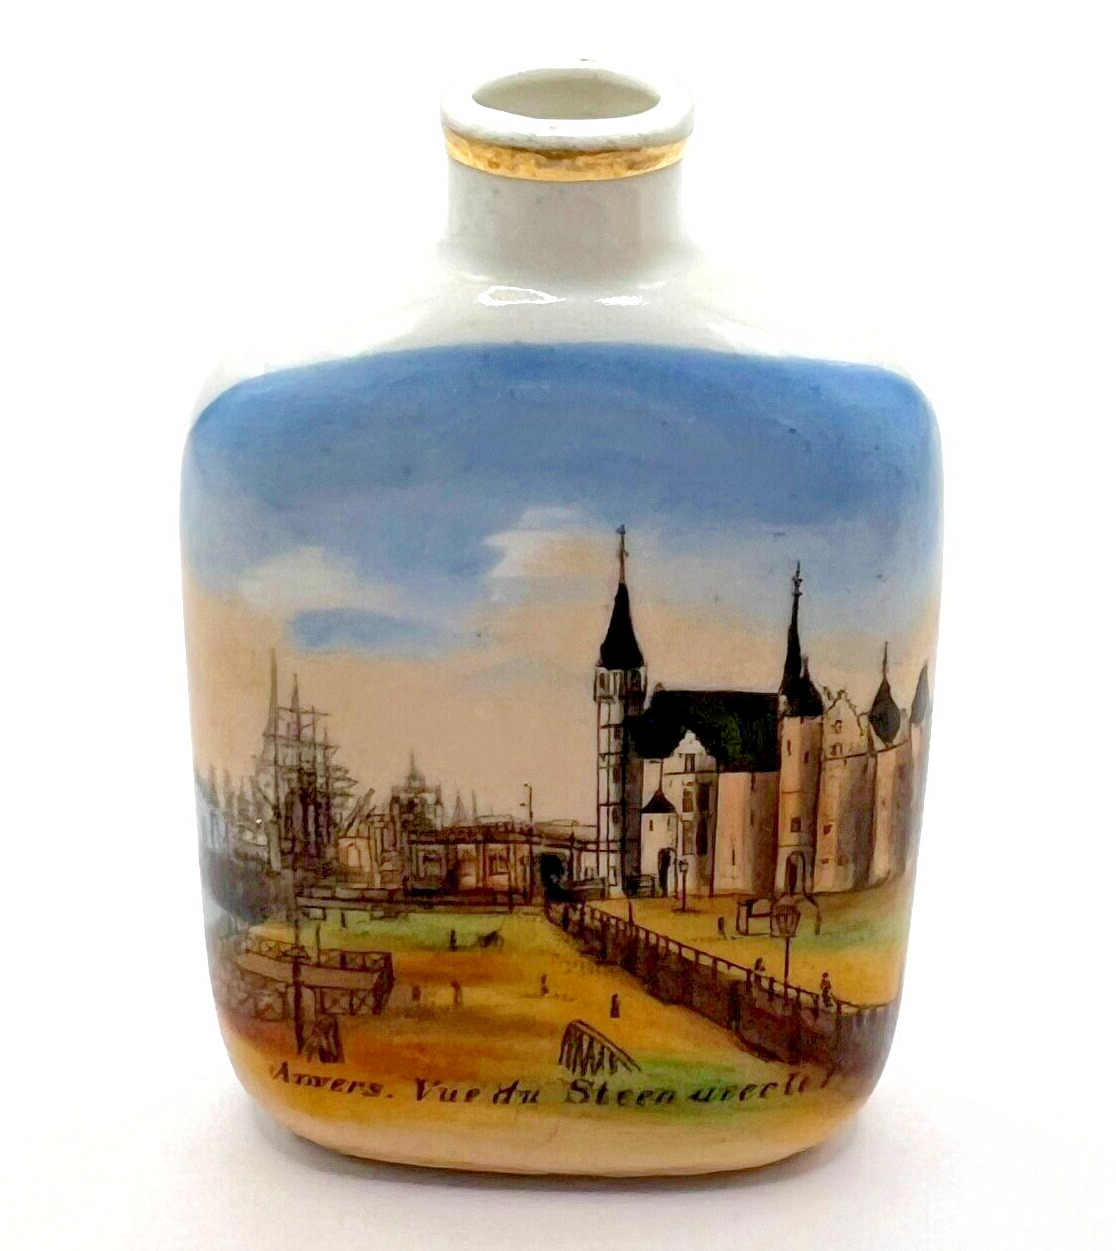 Antique Painted Porcelain Miniature Flask Reads Antwerp. View of Steen Uvecie Pa